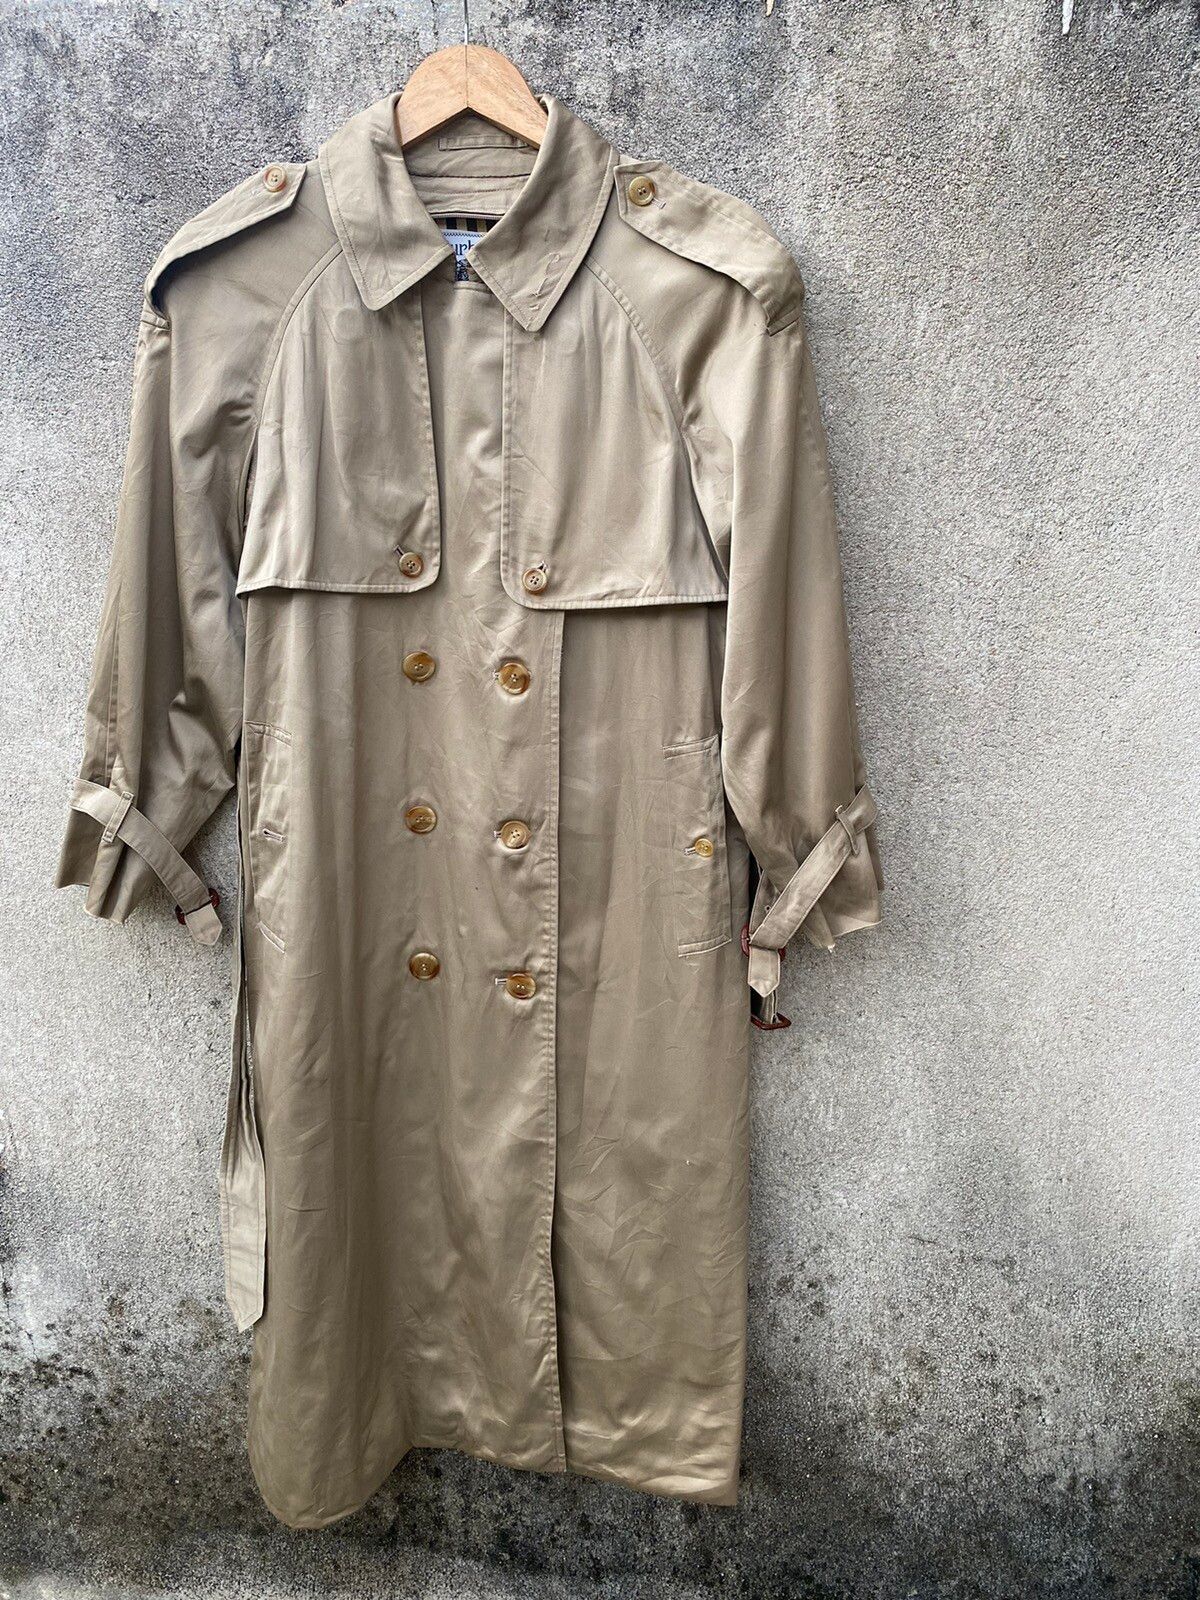 Burberry Prorsum - Burberrys Double Breasted Trench Coat Nova Check - 1